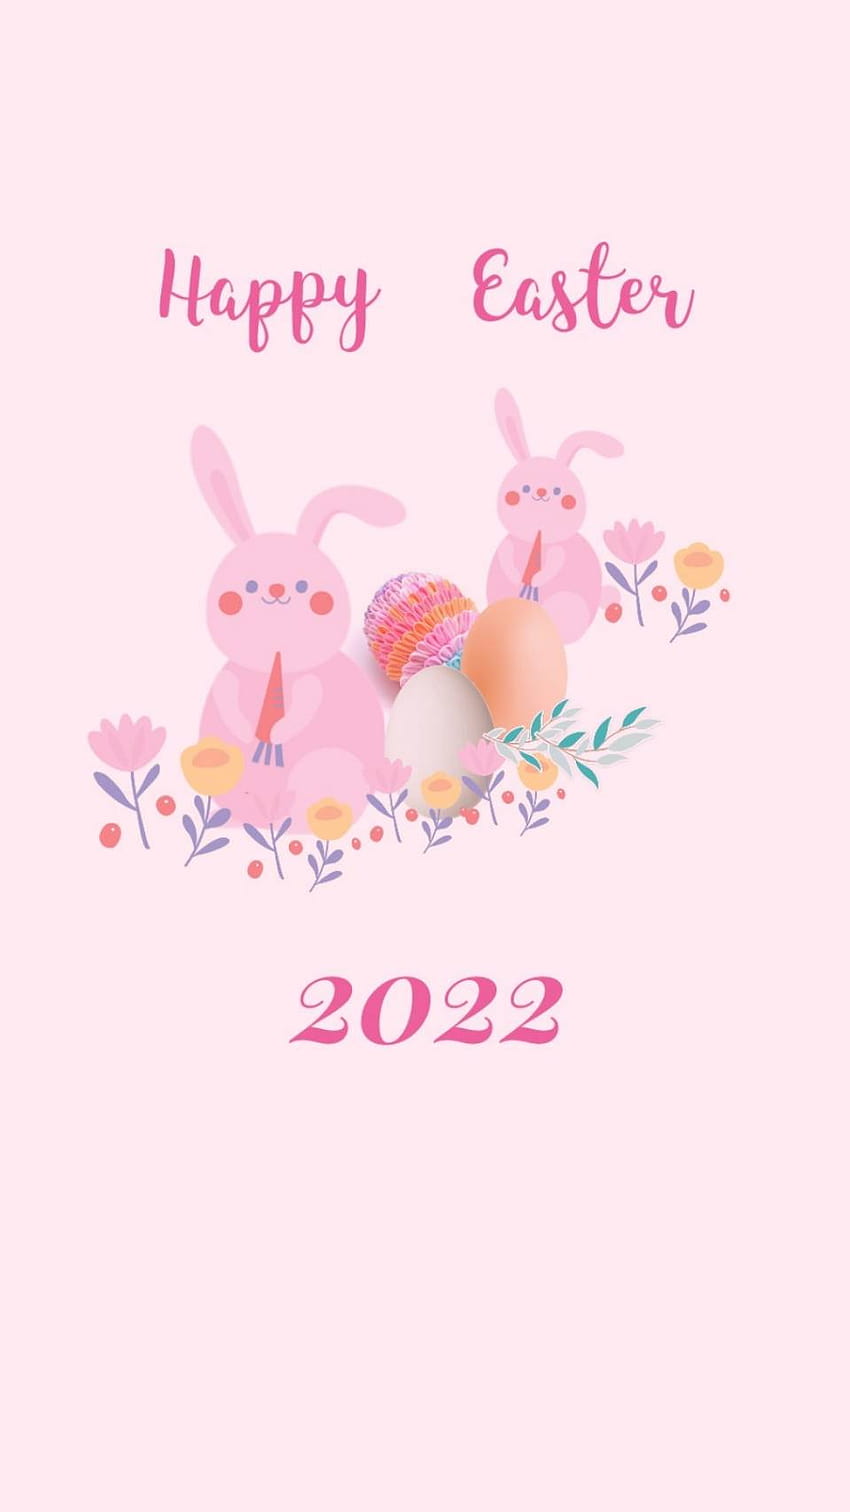 Happy easter 2019 with cute bunnies and eggs - Easter